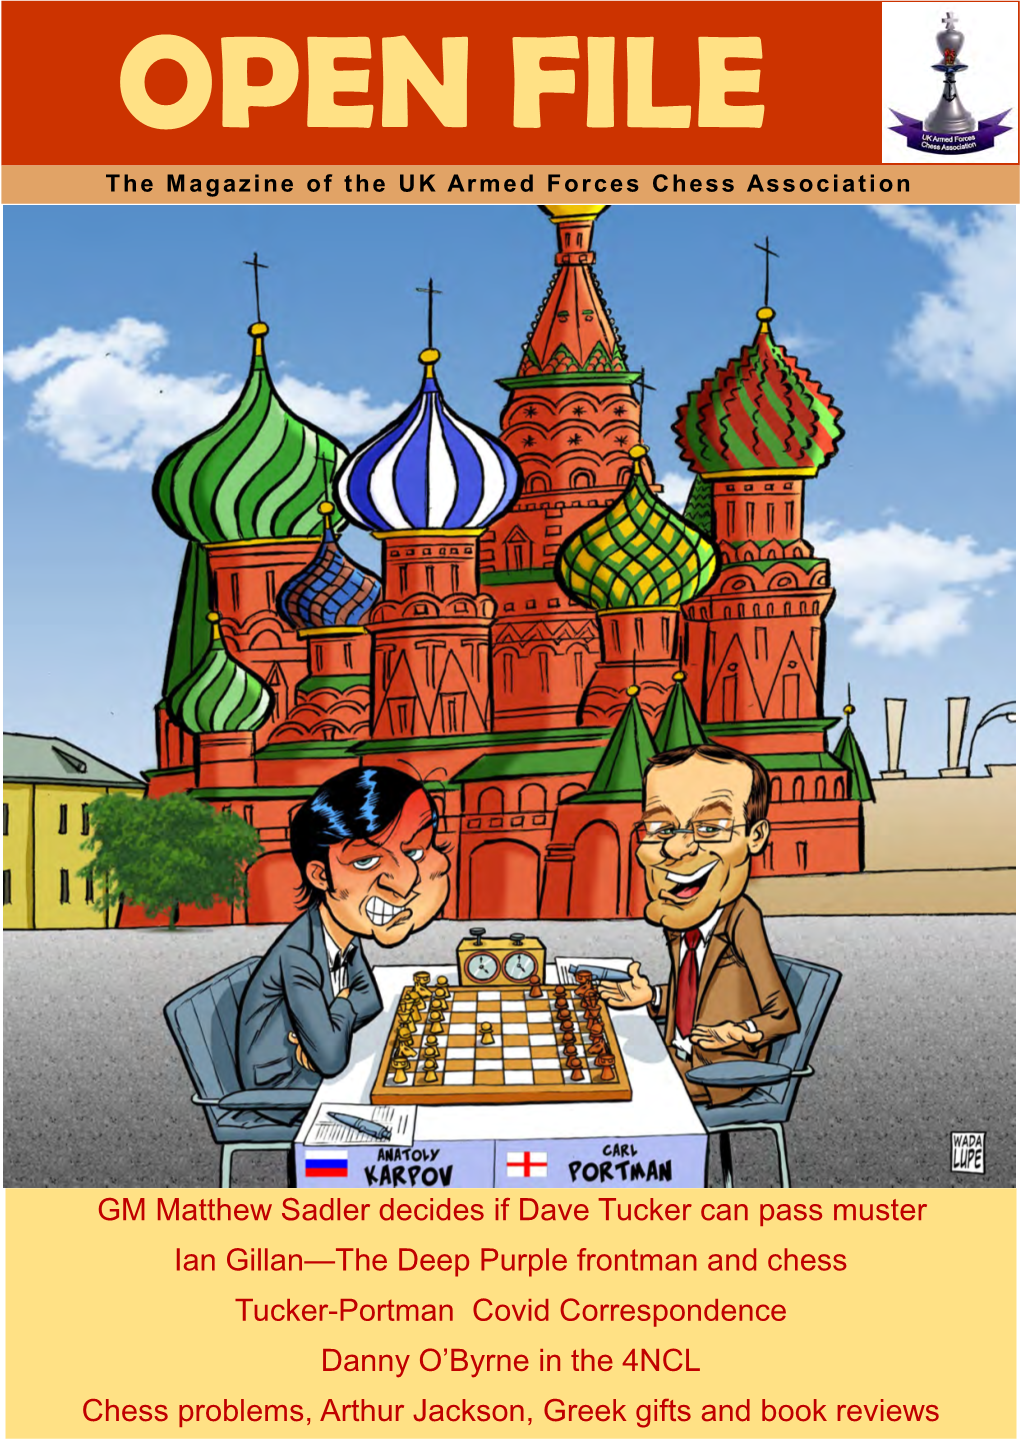 OPEN FILE the Magazine of the UK Armed Forces Chess Association